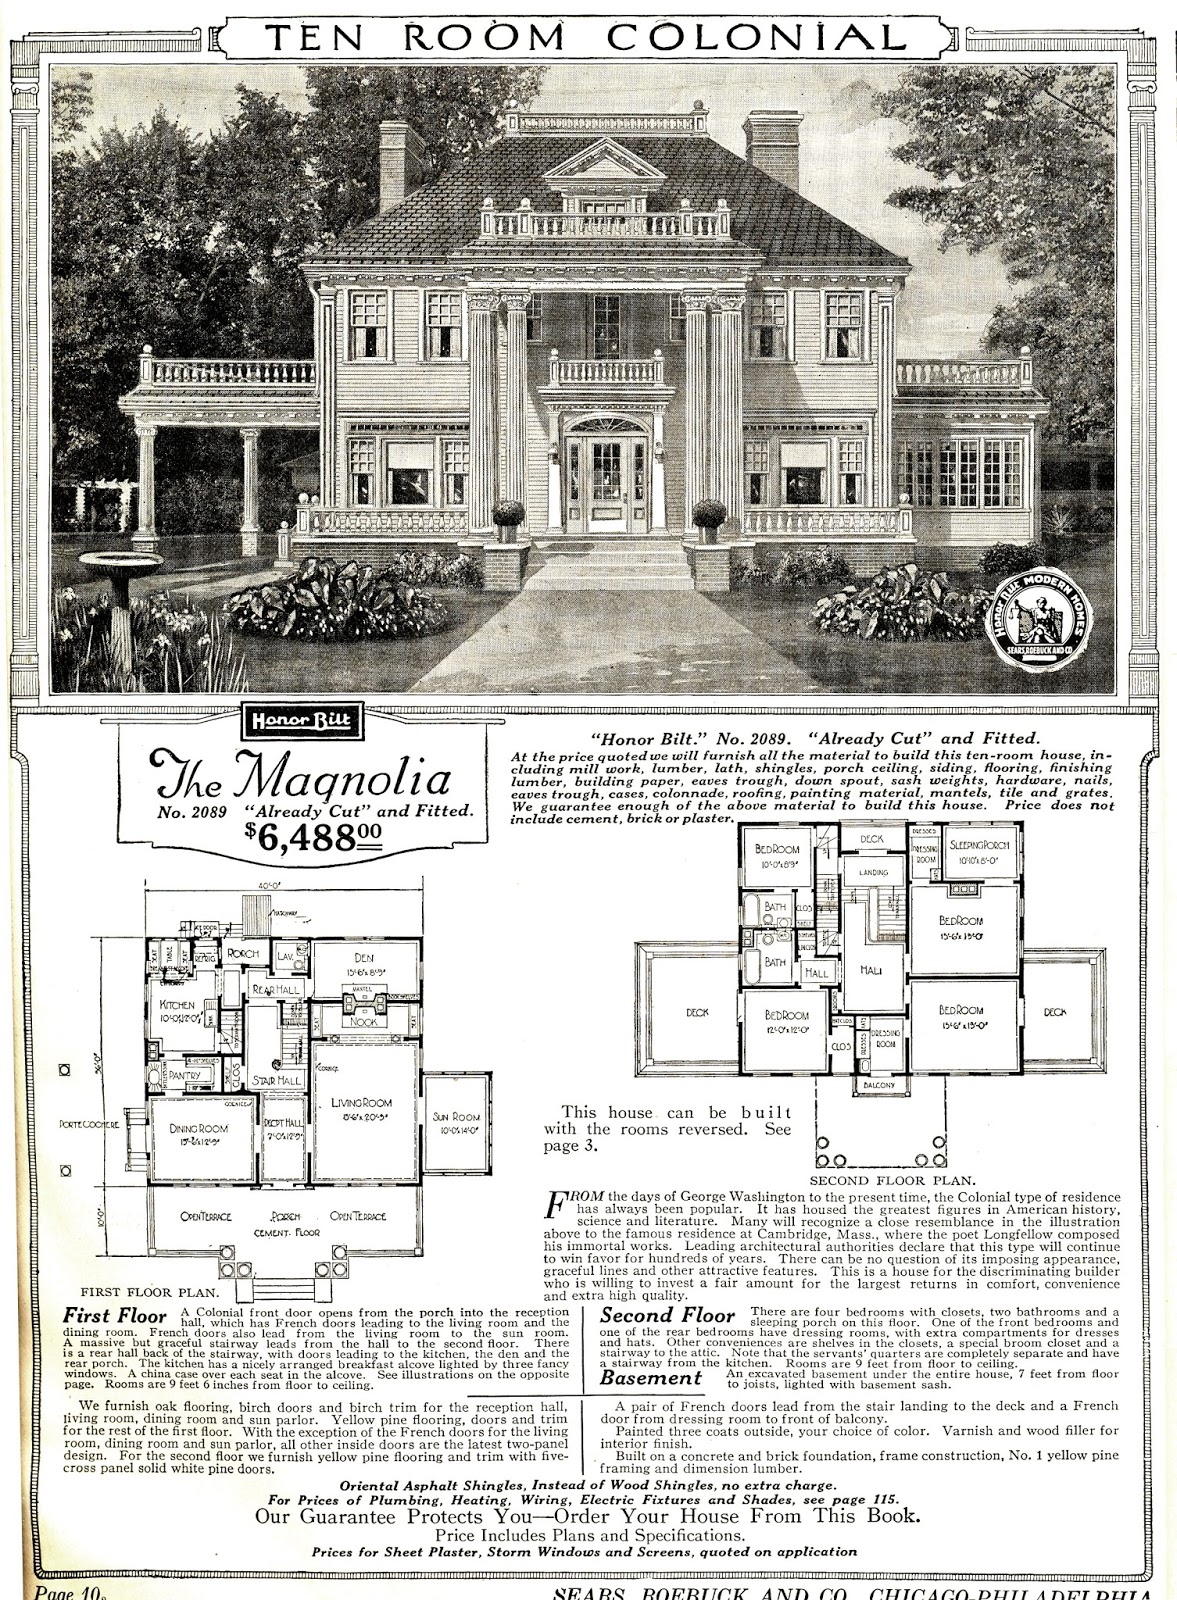 Sweethearts Of The West: SEARS CATALOGUE HOMES